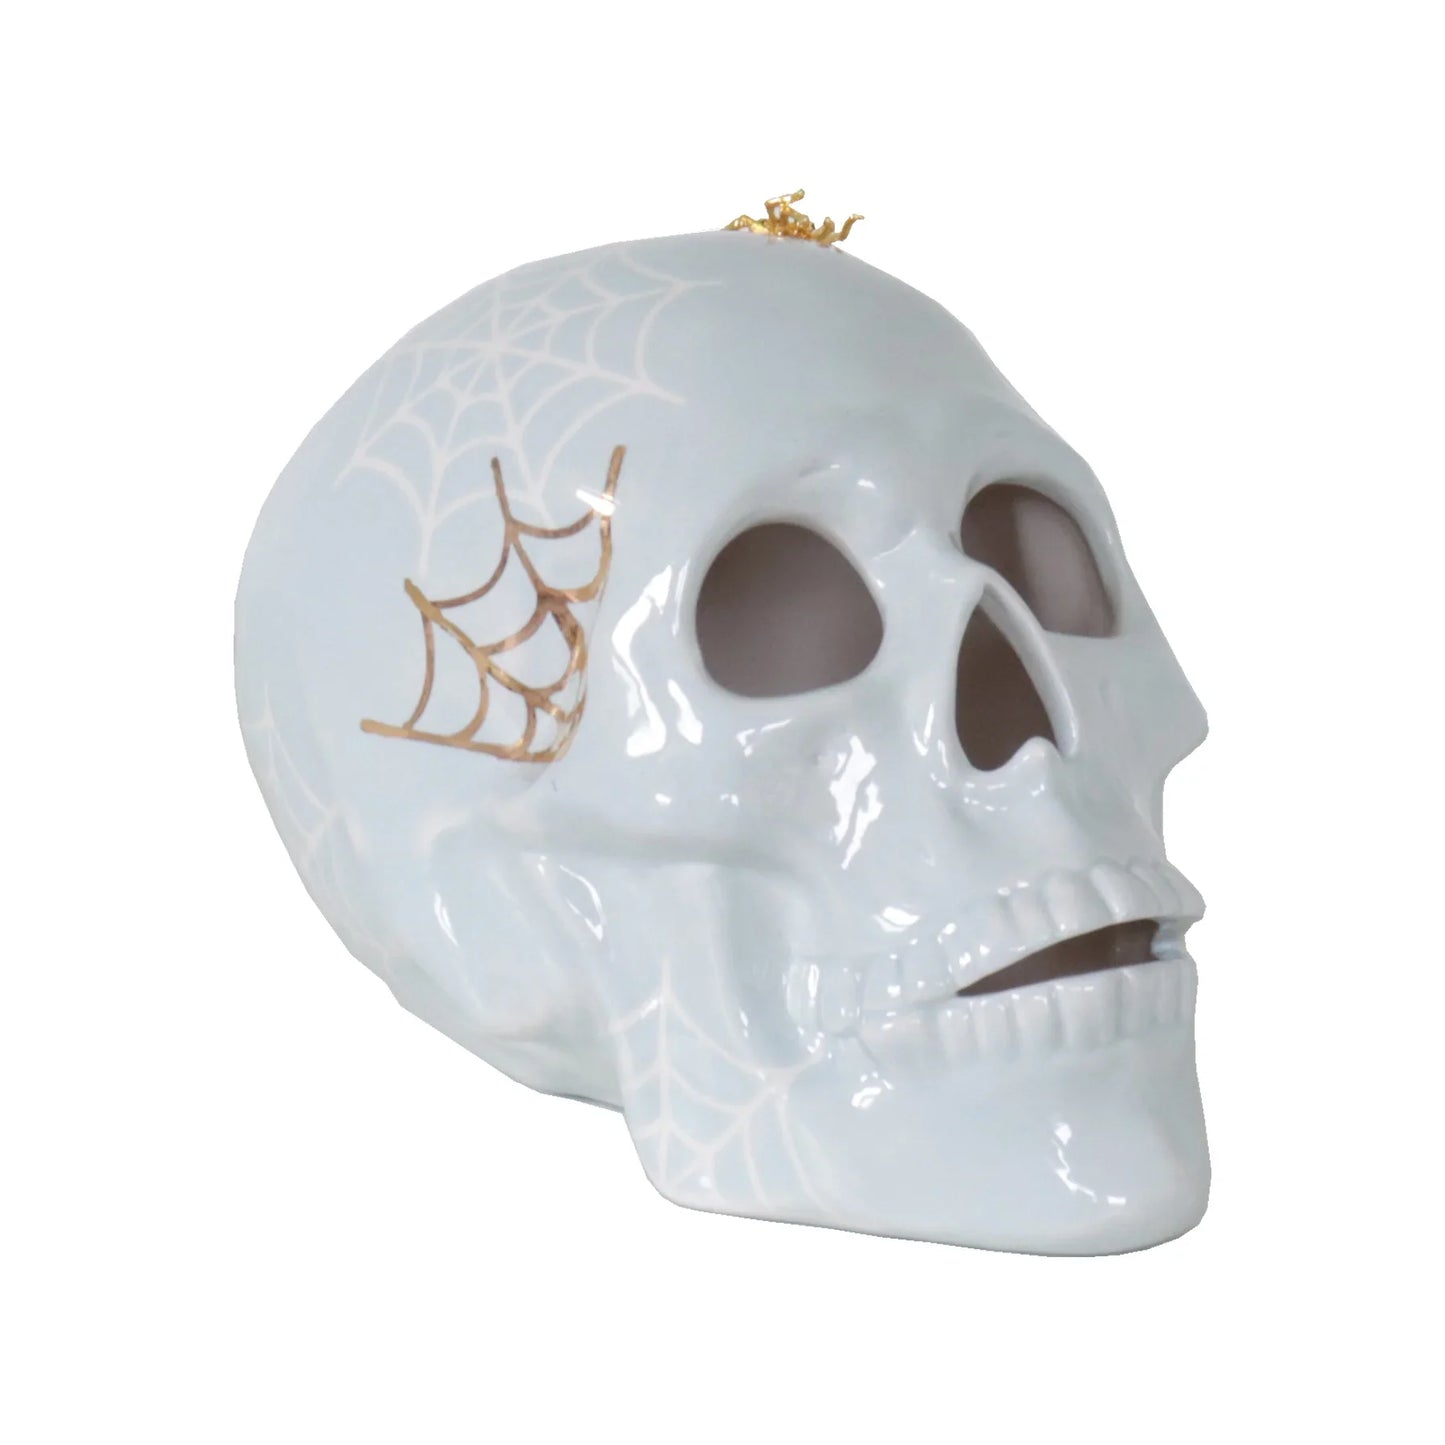 "Mr. Bones and Charlotte" Skull Decor with 22K Gold Accents- Light Blue | Wholesale